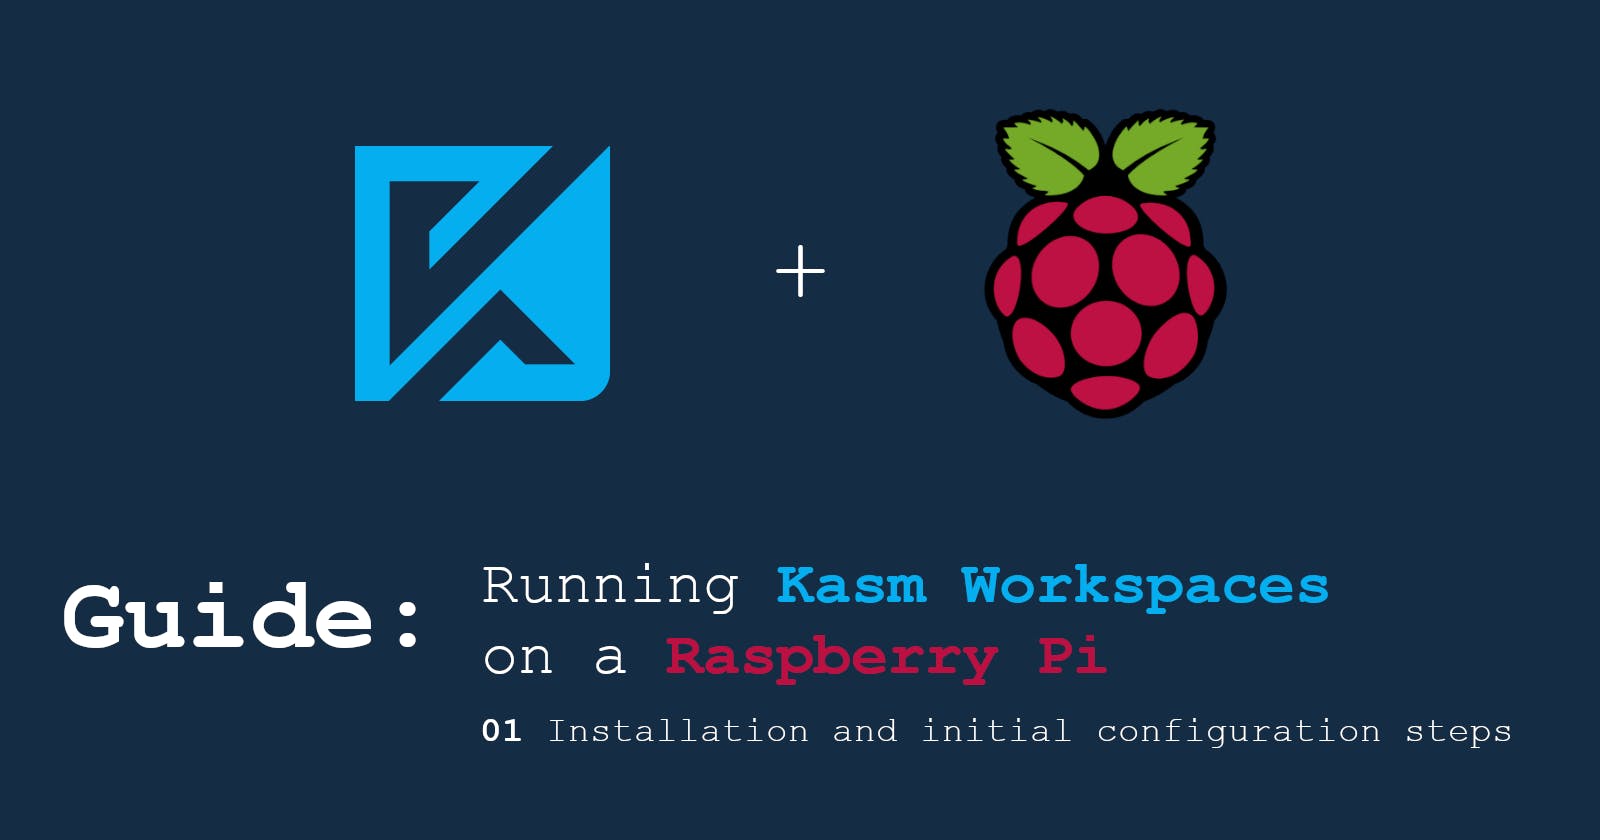 Kasm Workspaces: Spinning up containers on the Raspberry Pi